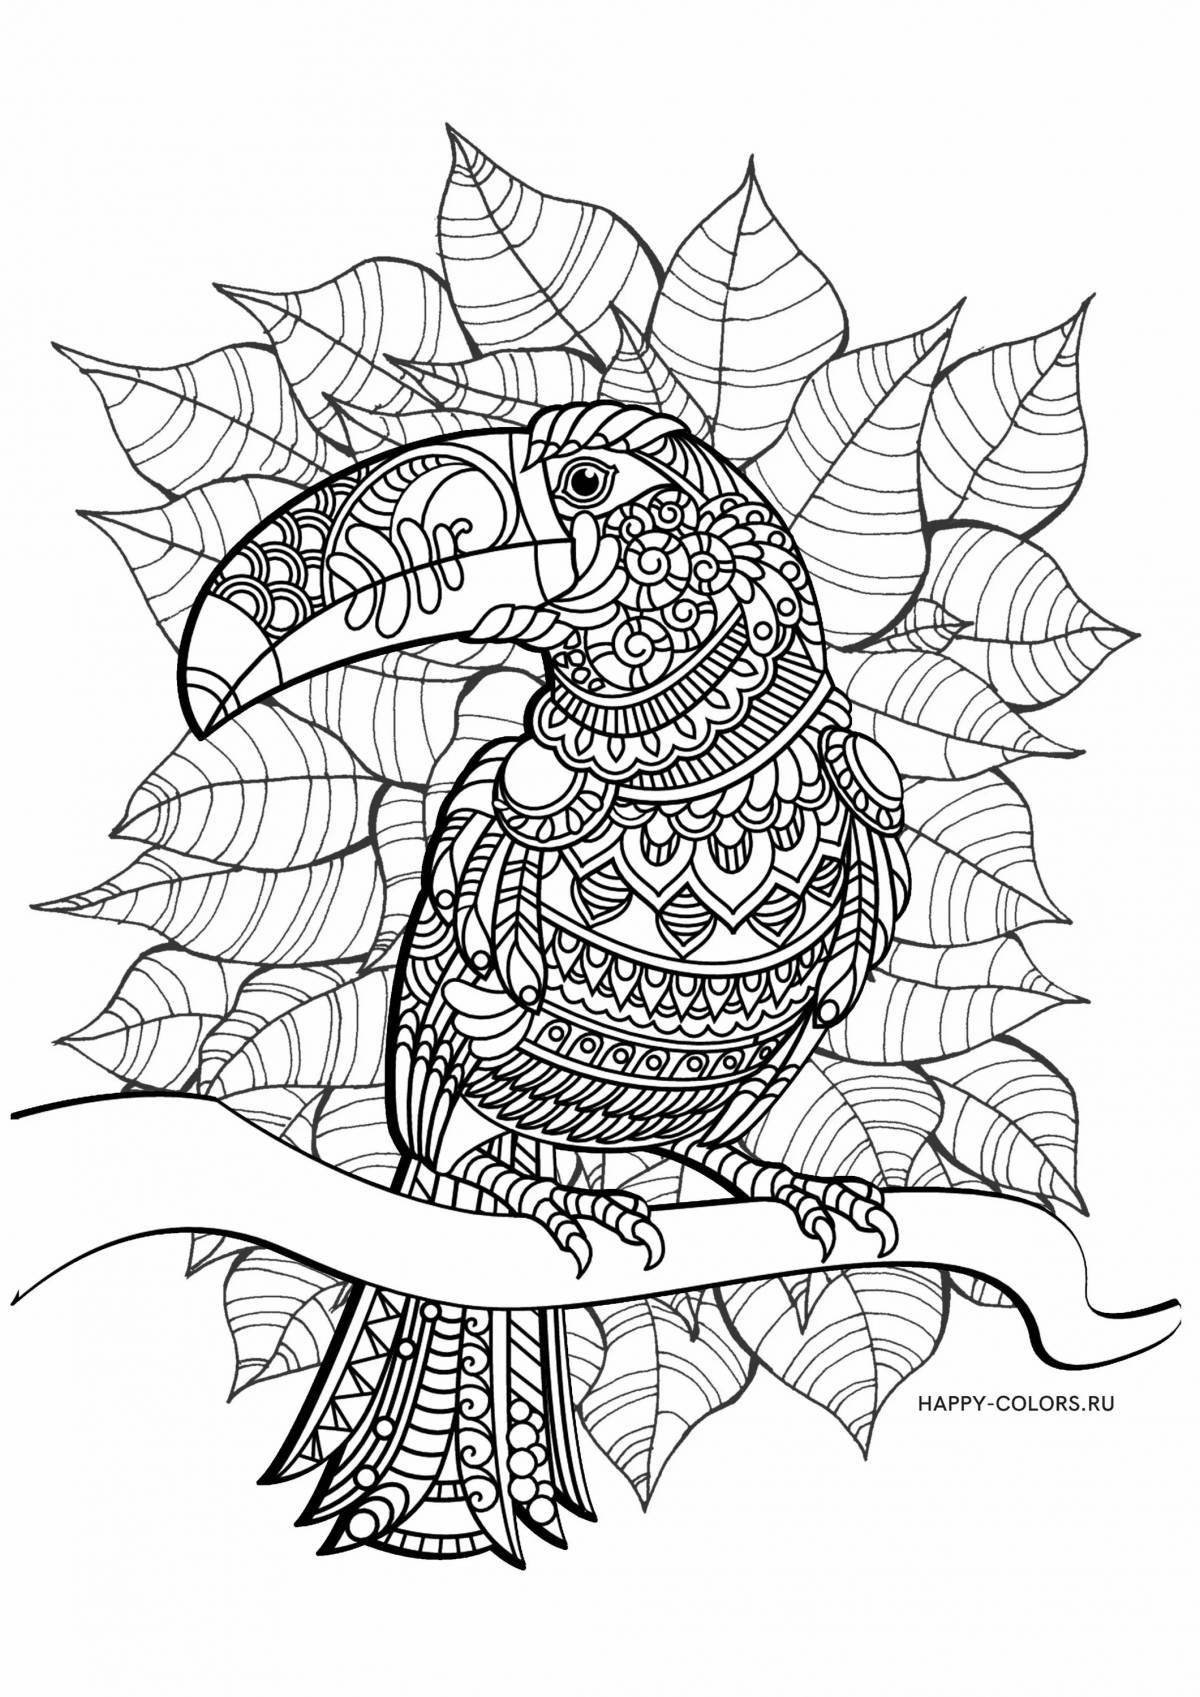 Amazing animal coloring pages